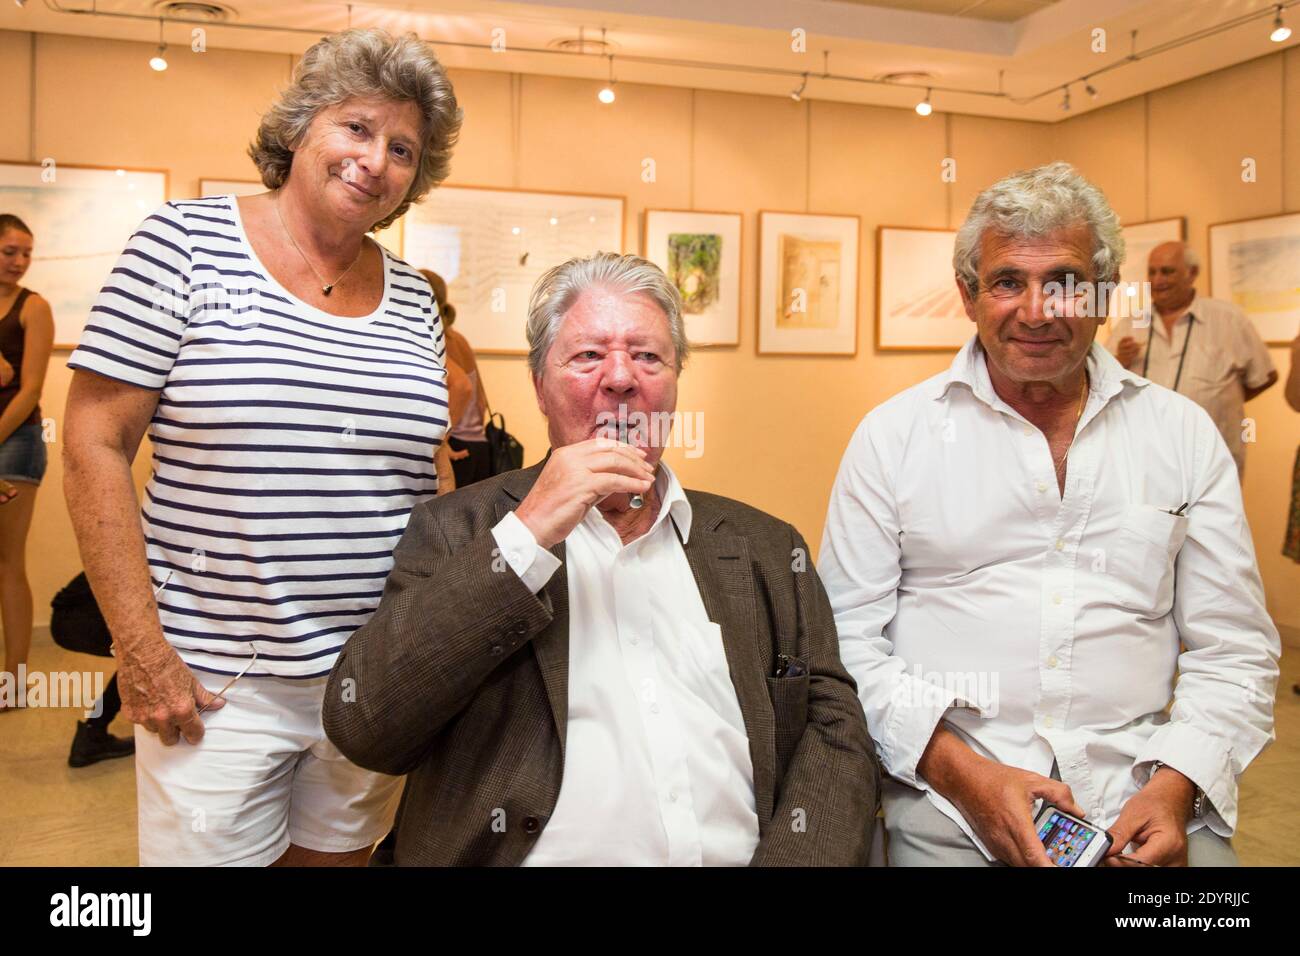 EXCLUSIVE. French cartoonist Jean-Jacques Sempe poses with Jacqueline Franjou and Michel Boujenah during the opening of his drawing exhibition in Ramatuelle, south of France on July 31, 2013. Photo by Cyril Bruneau/ABACAPRESS.COM Stock Photo